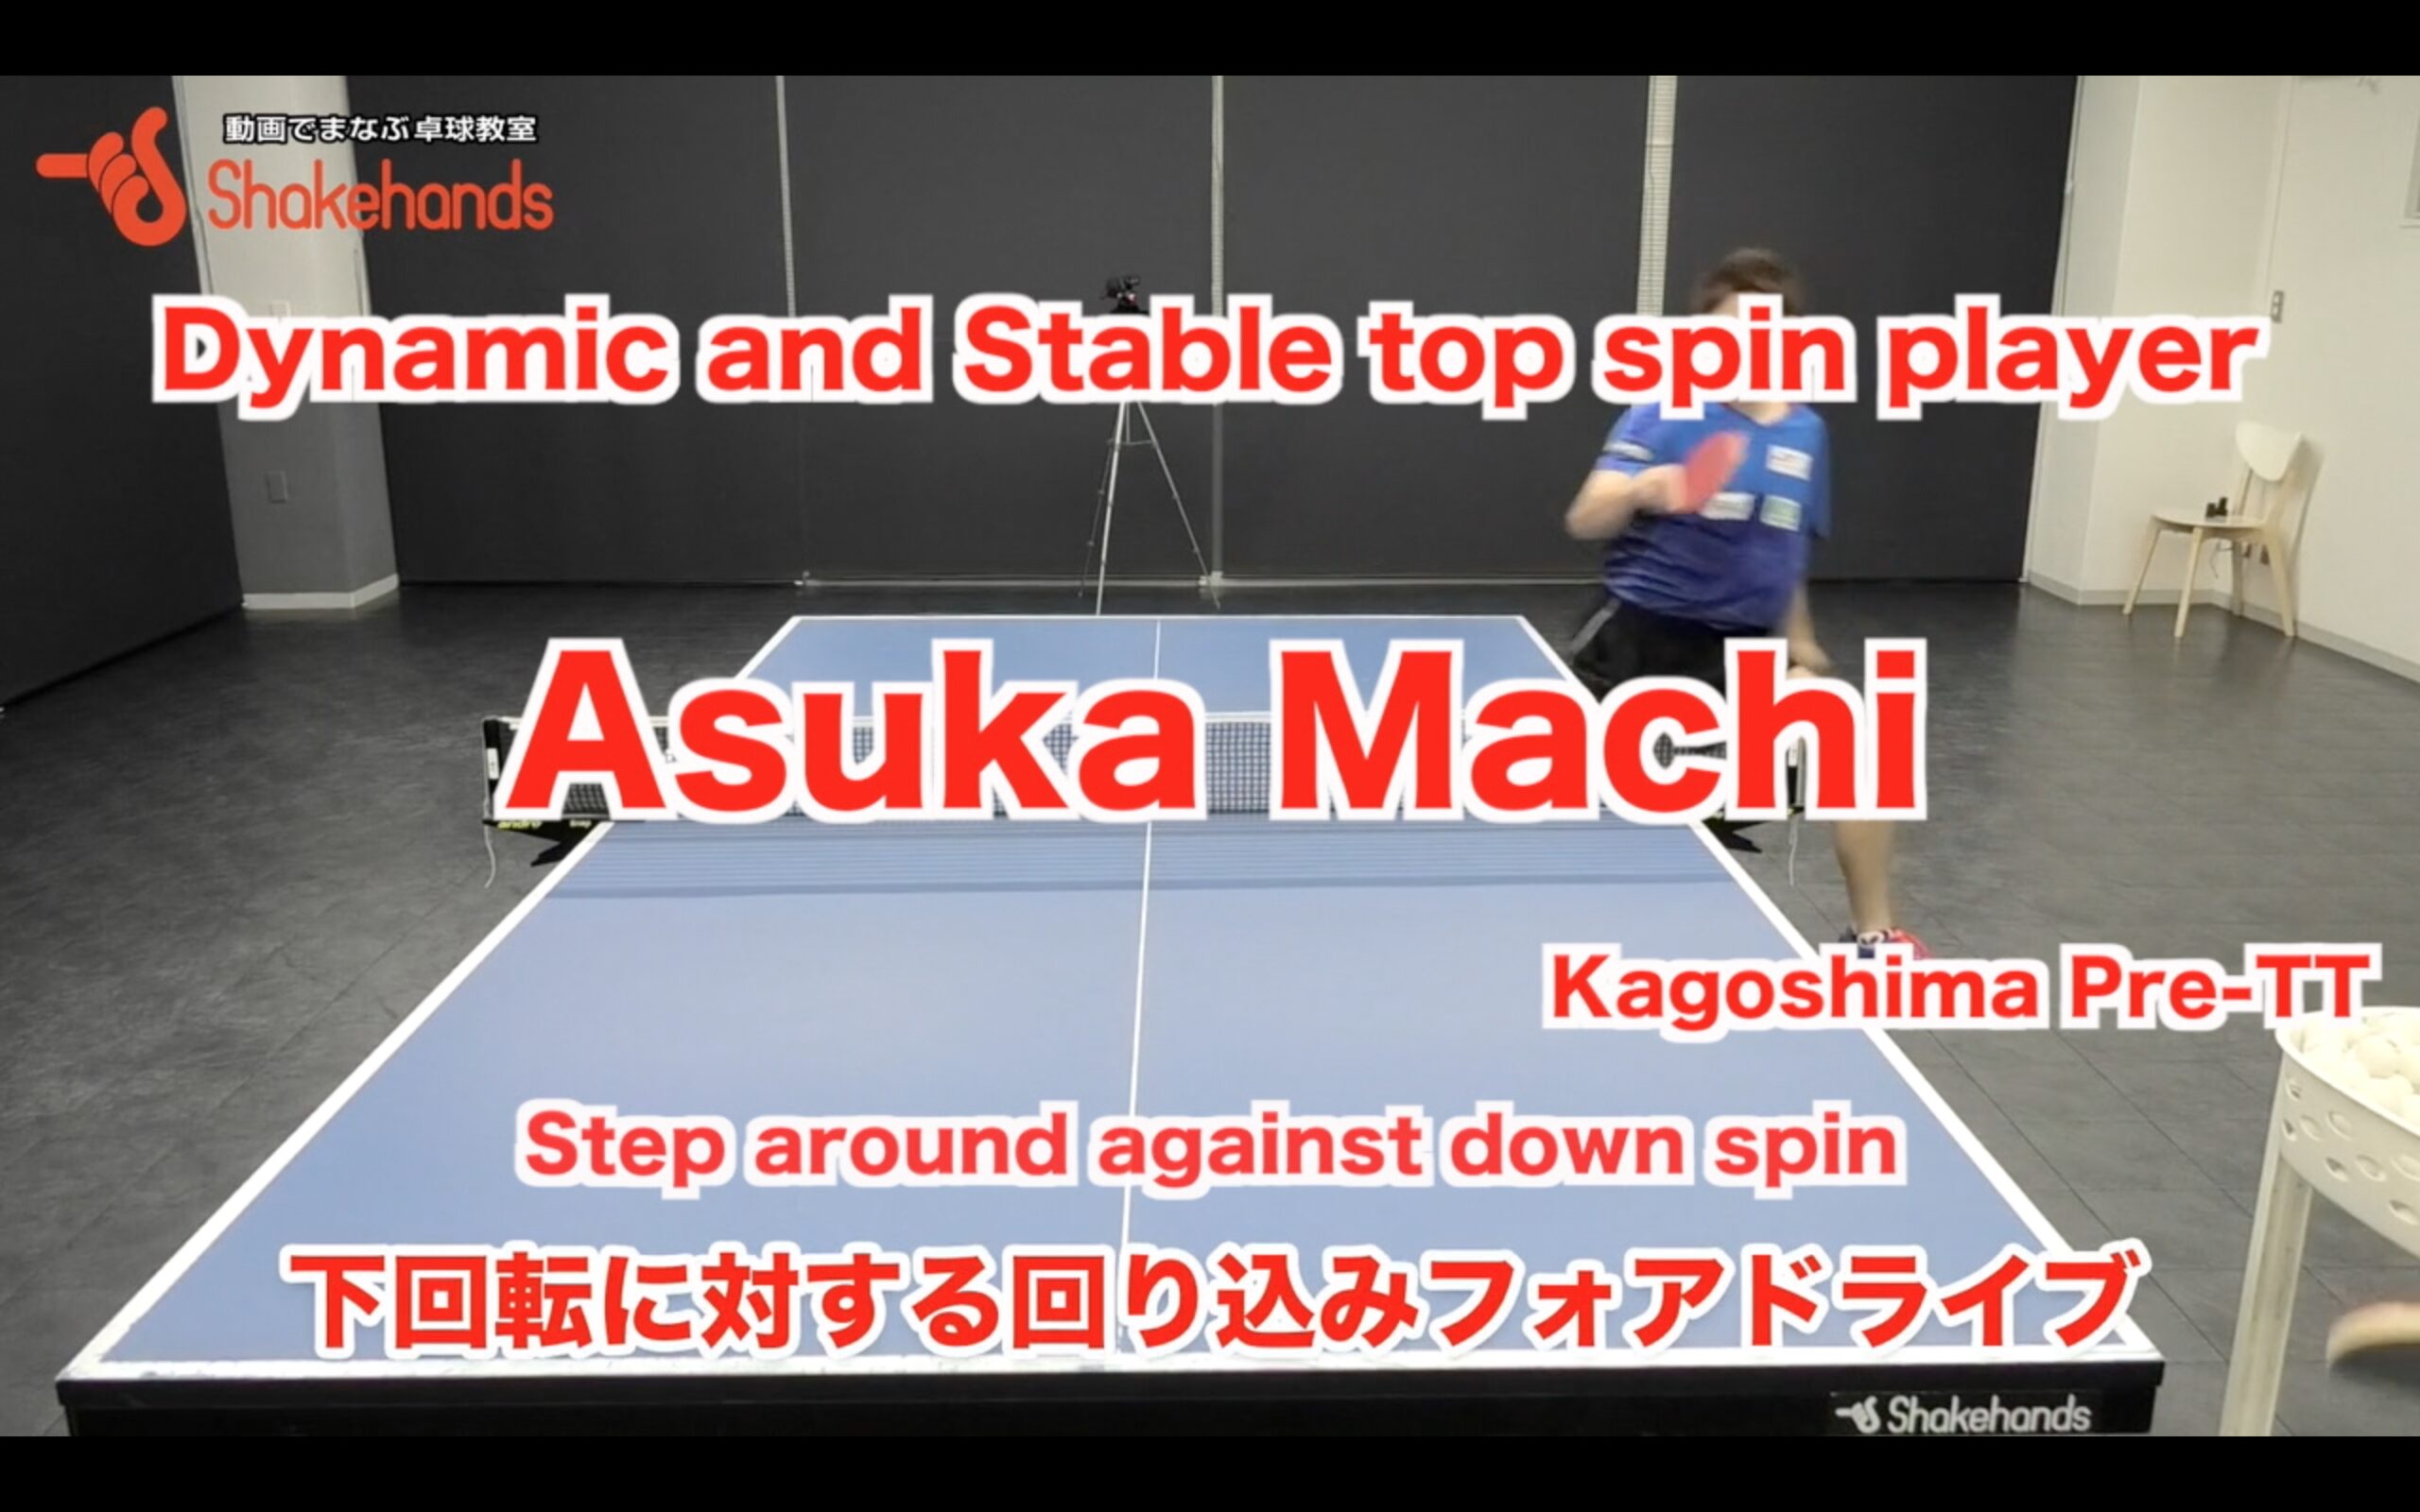 Step around against down spin